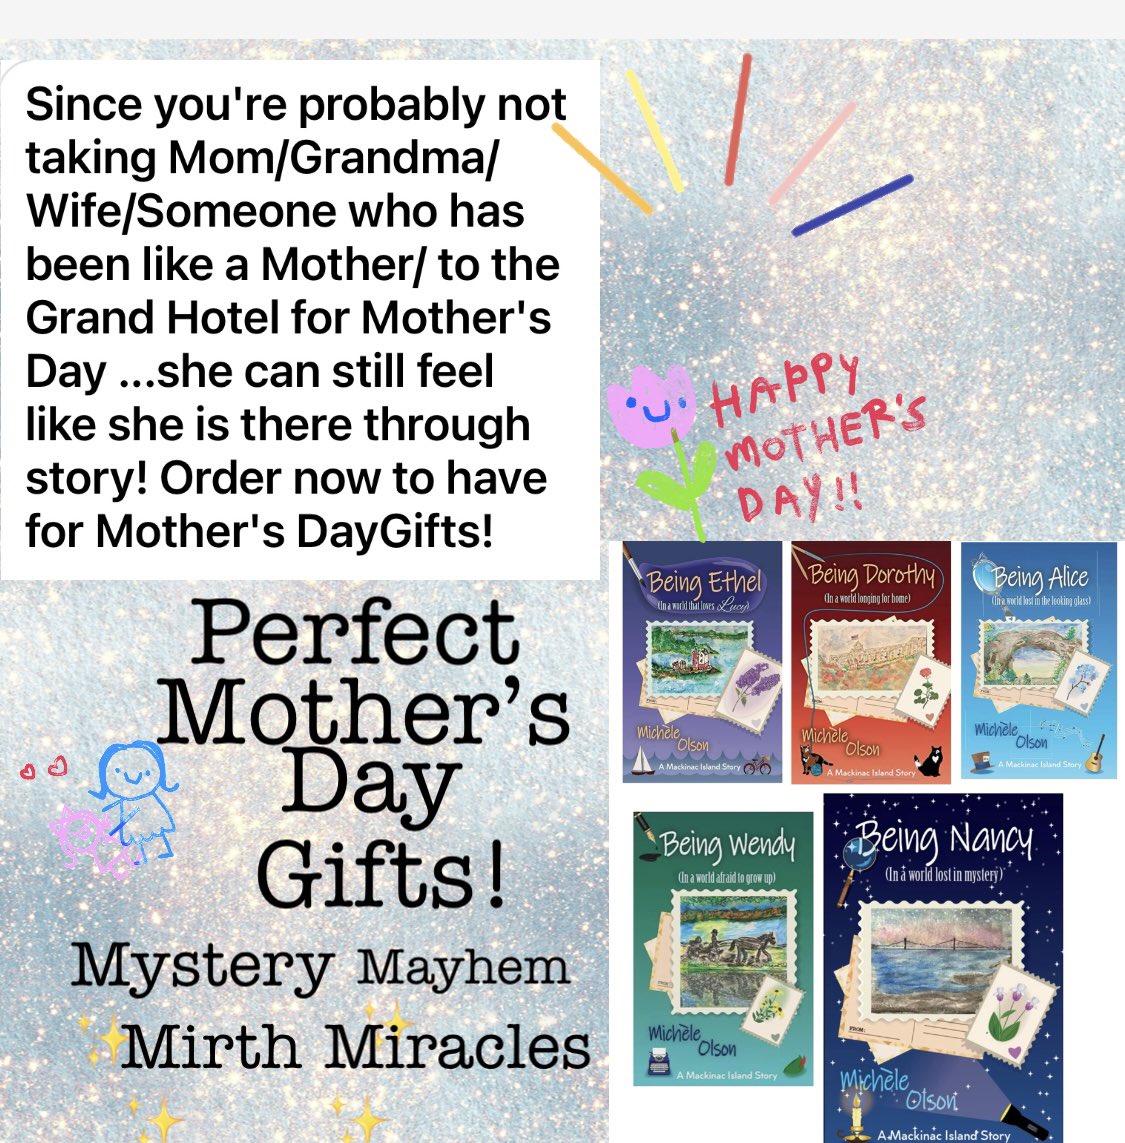 Order now for Mom day gifts or for yourself!Journey to Mackinac Island with stories filled with mystery, mayhem, and miracles …free in KU - ebooks on Amazon and paperbacks everywhere ♥️ amzn.to/3wnaEWj #MothersDayGifts #mothersday #writerslift